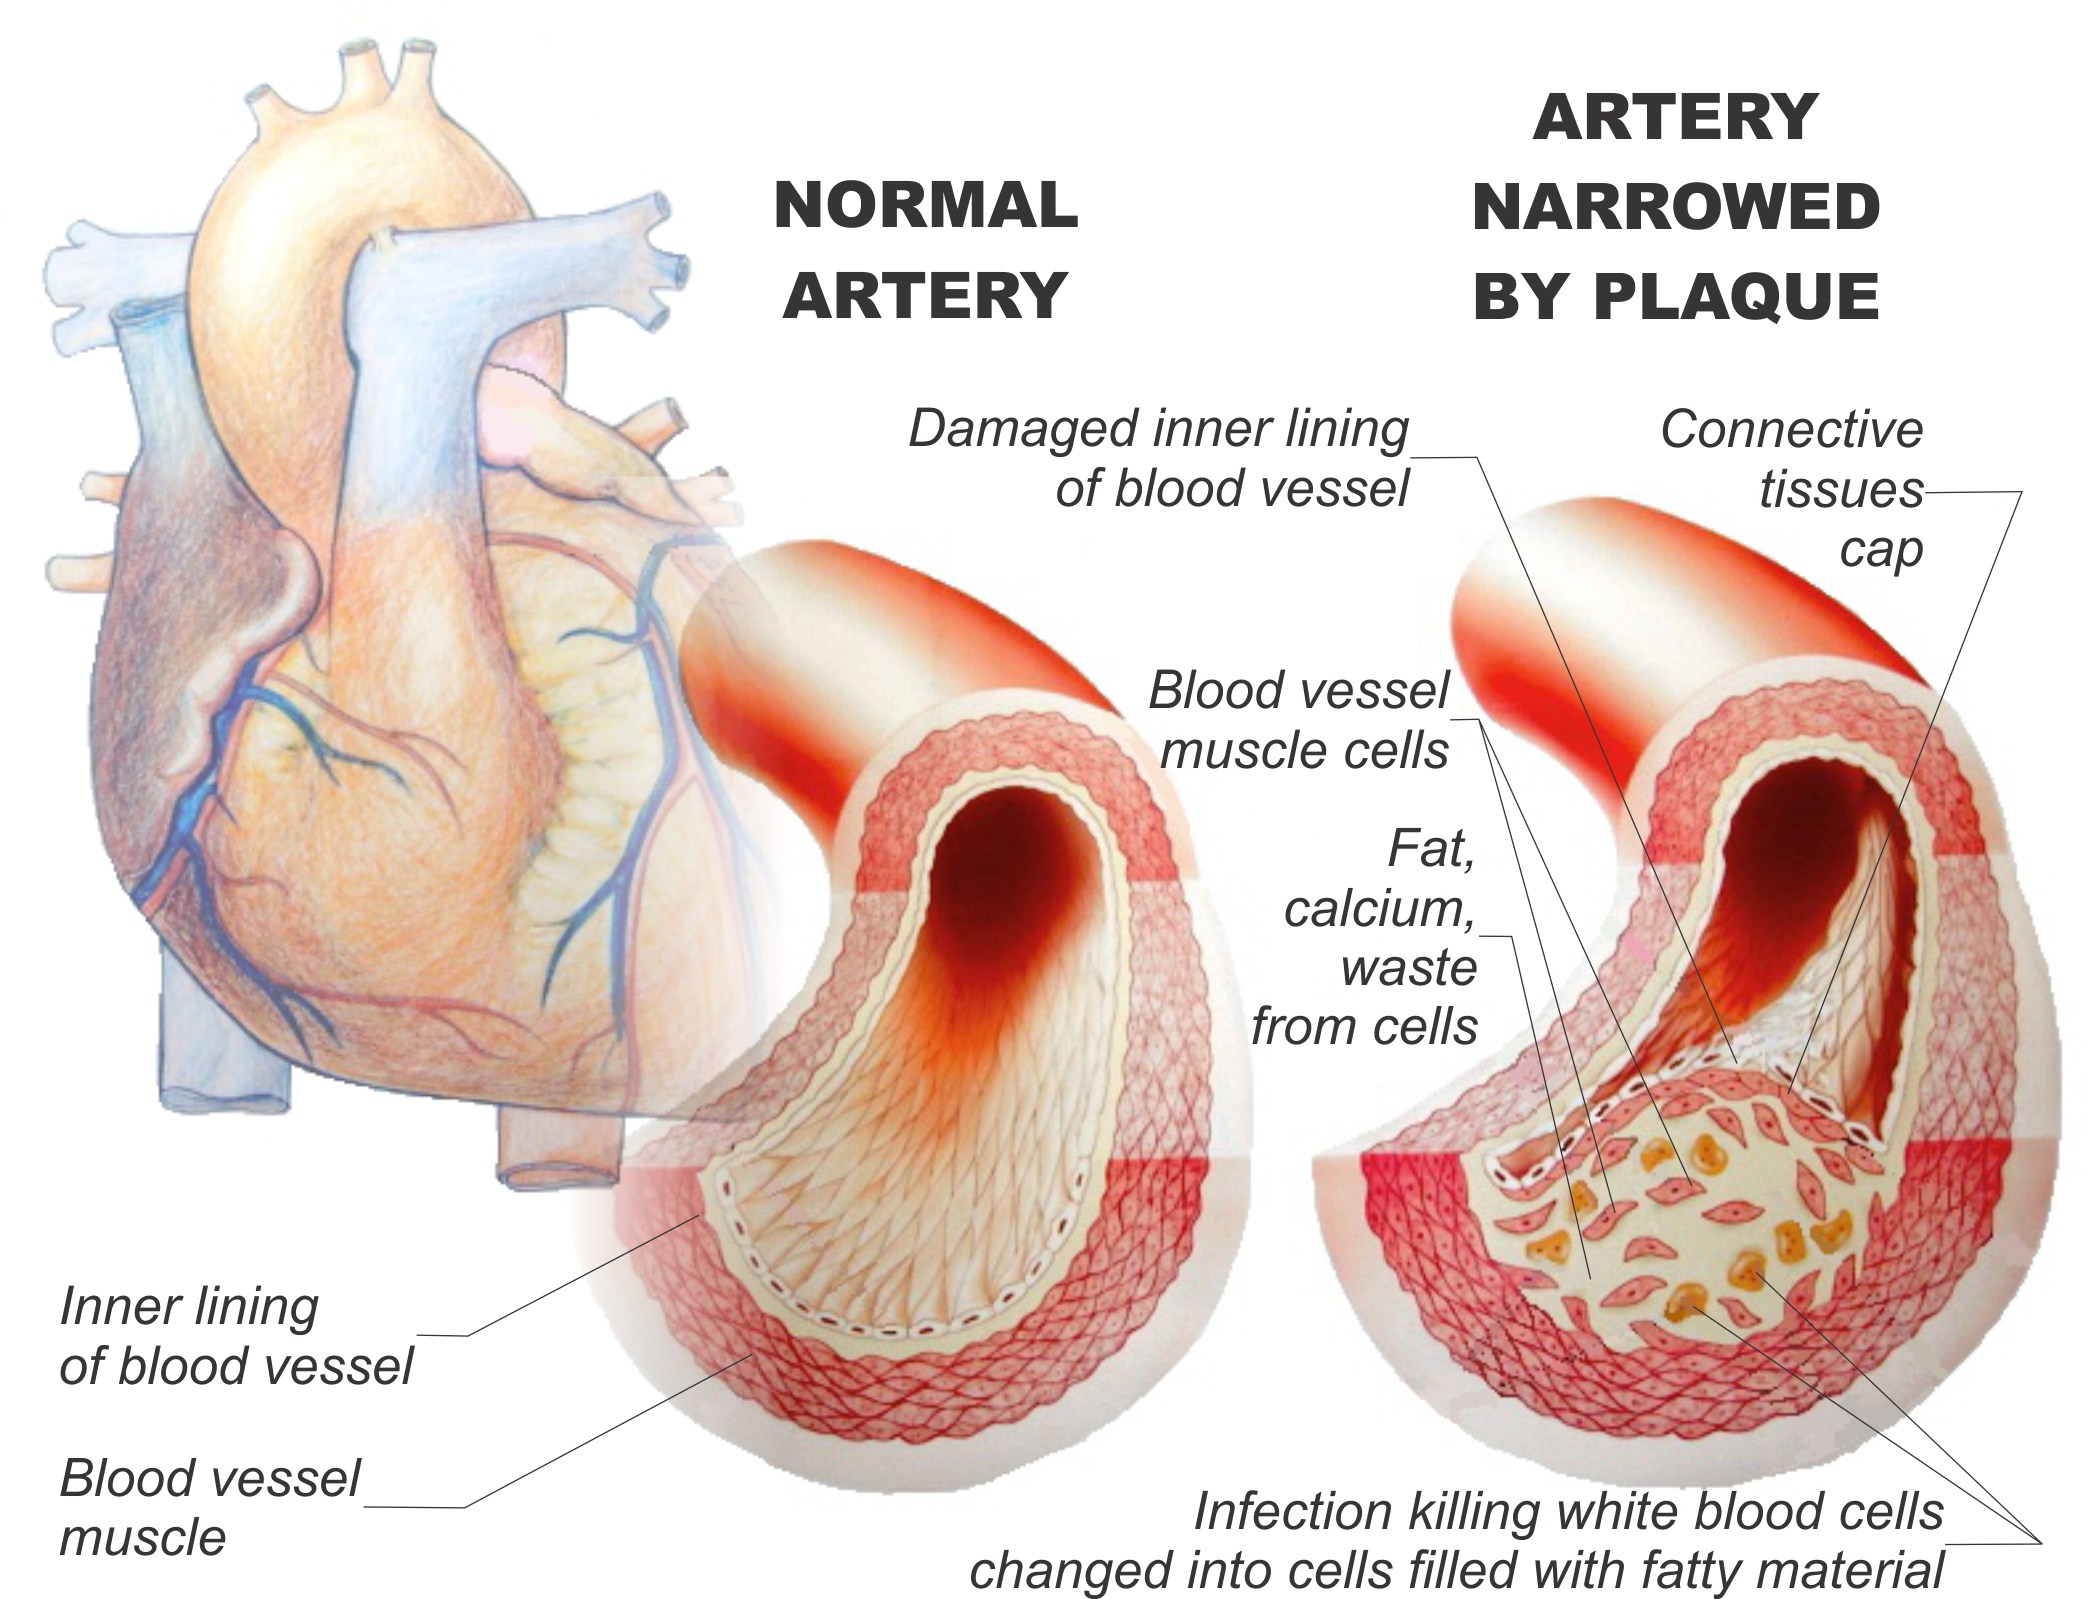 Normal artery and artery narrowed by plaque